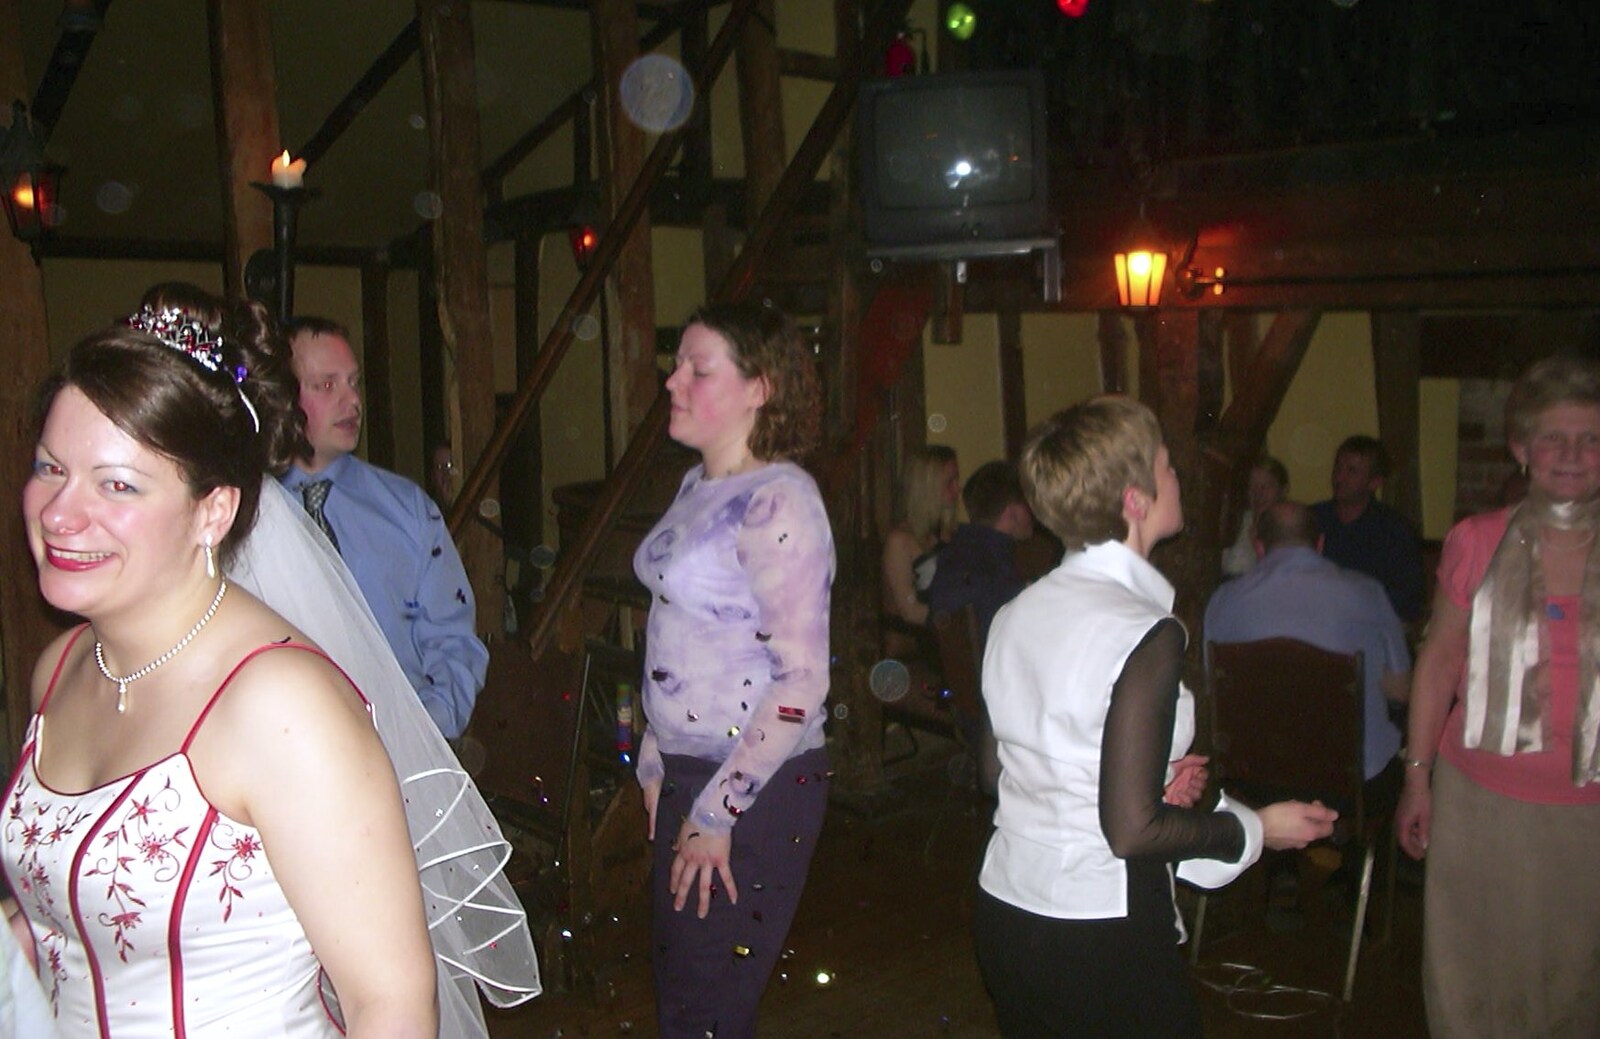 Clare in the Brome Grange's barn from Mikey-P and Clare's Wedding Reception, Brome Grange, Suffolk - 20th March 2004